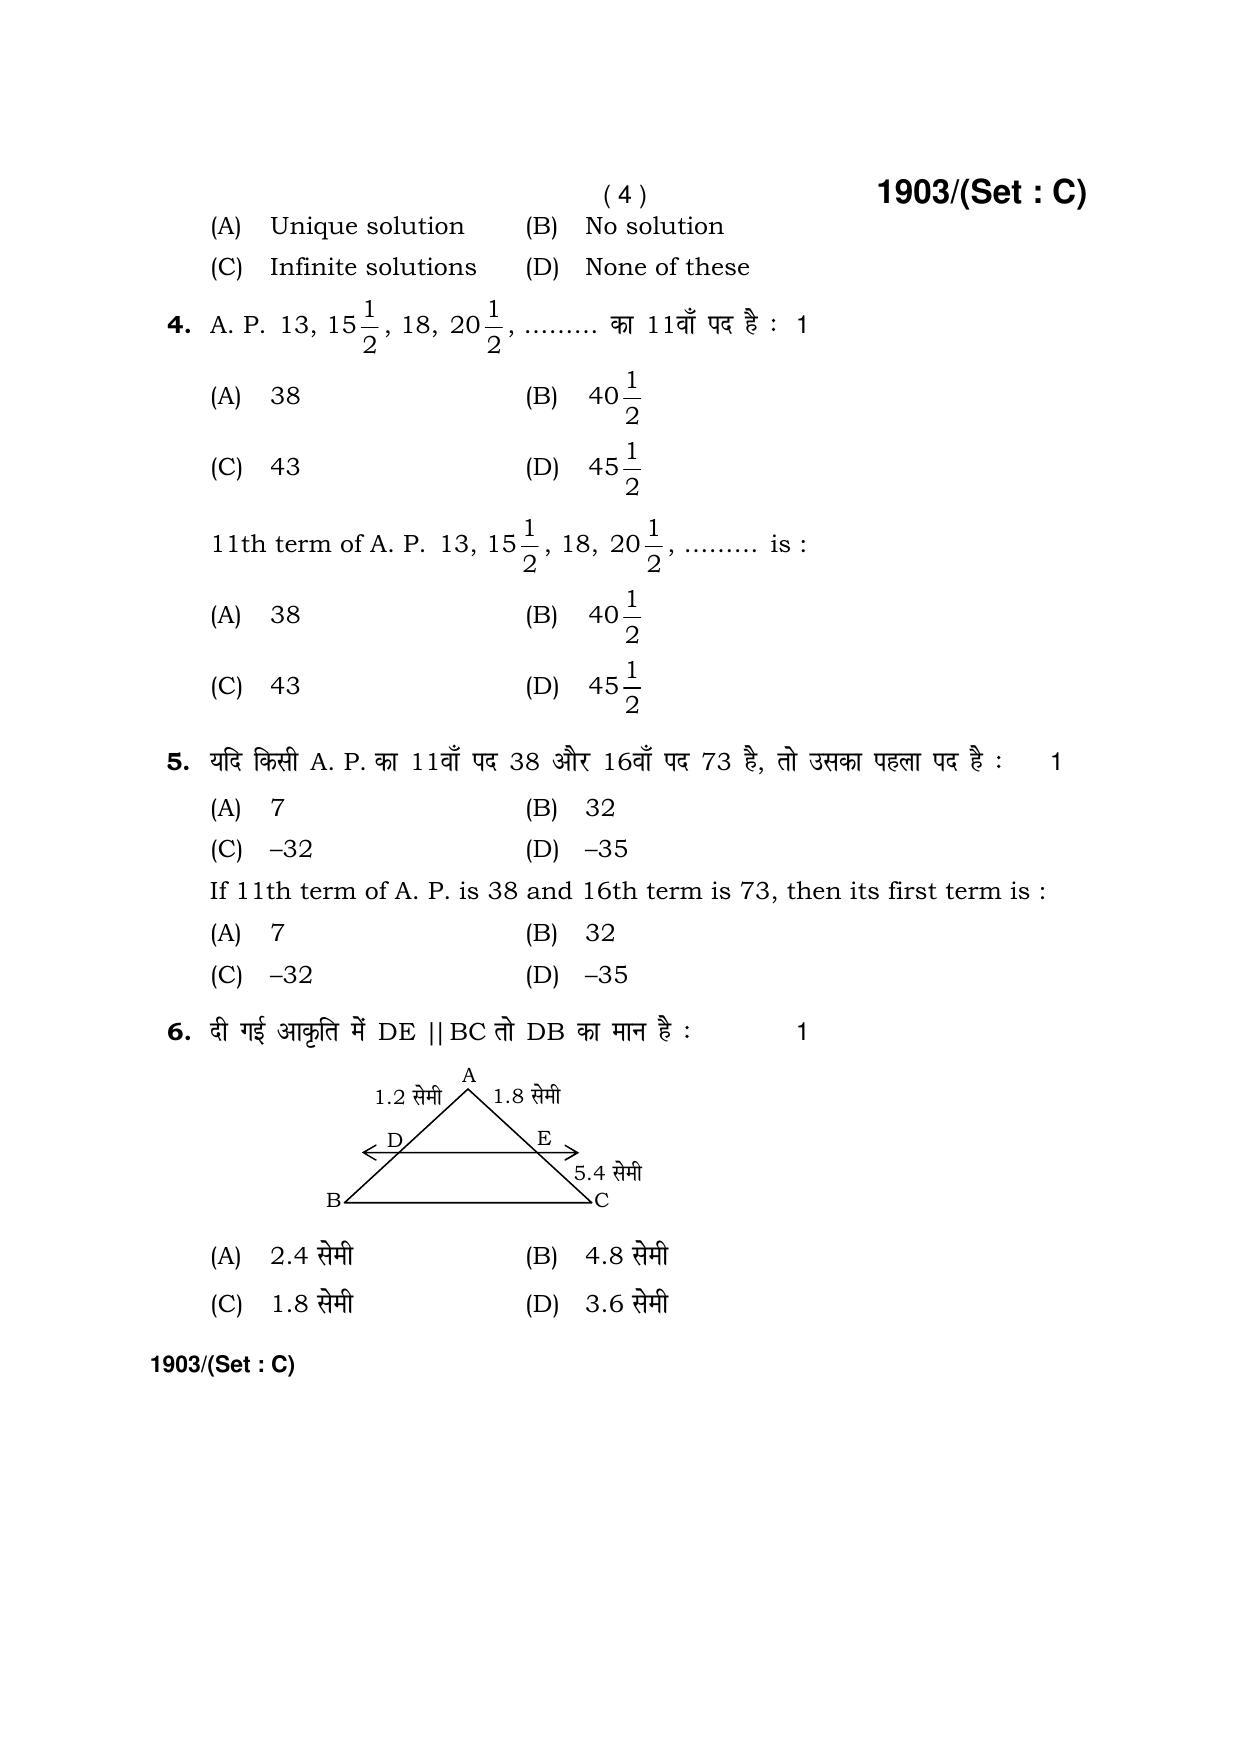 Haryana Board HBSE Class 10 Mathematics -C 2017 Question Paper - Page 4